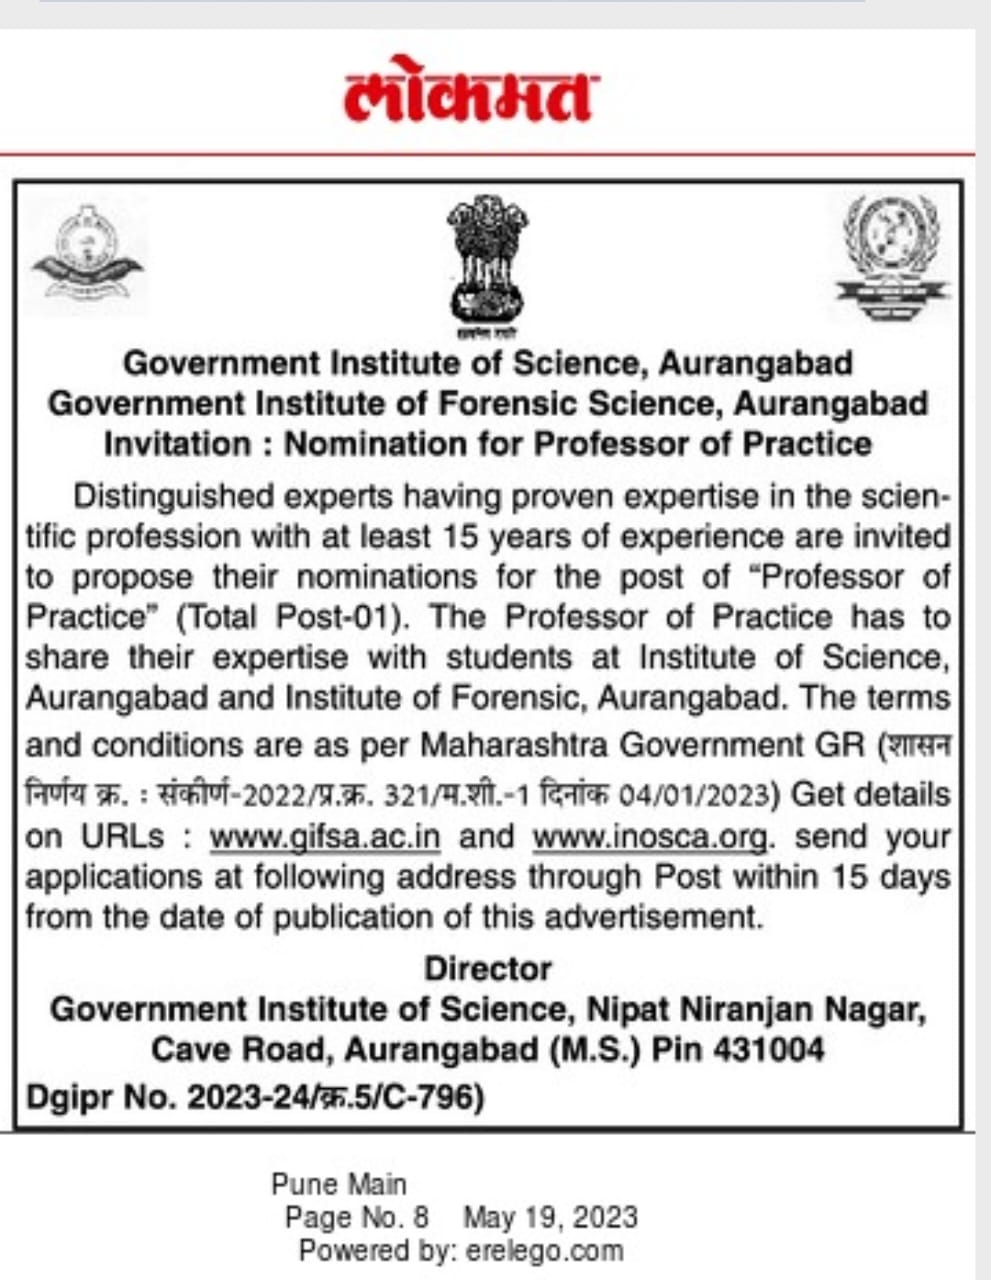 Applications are invited forNomination for Professor of Practice